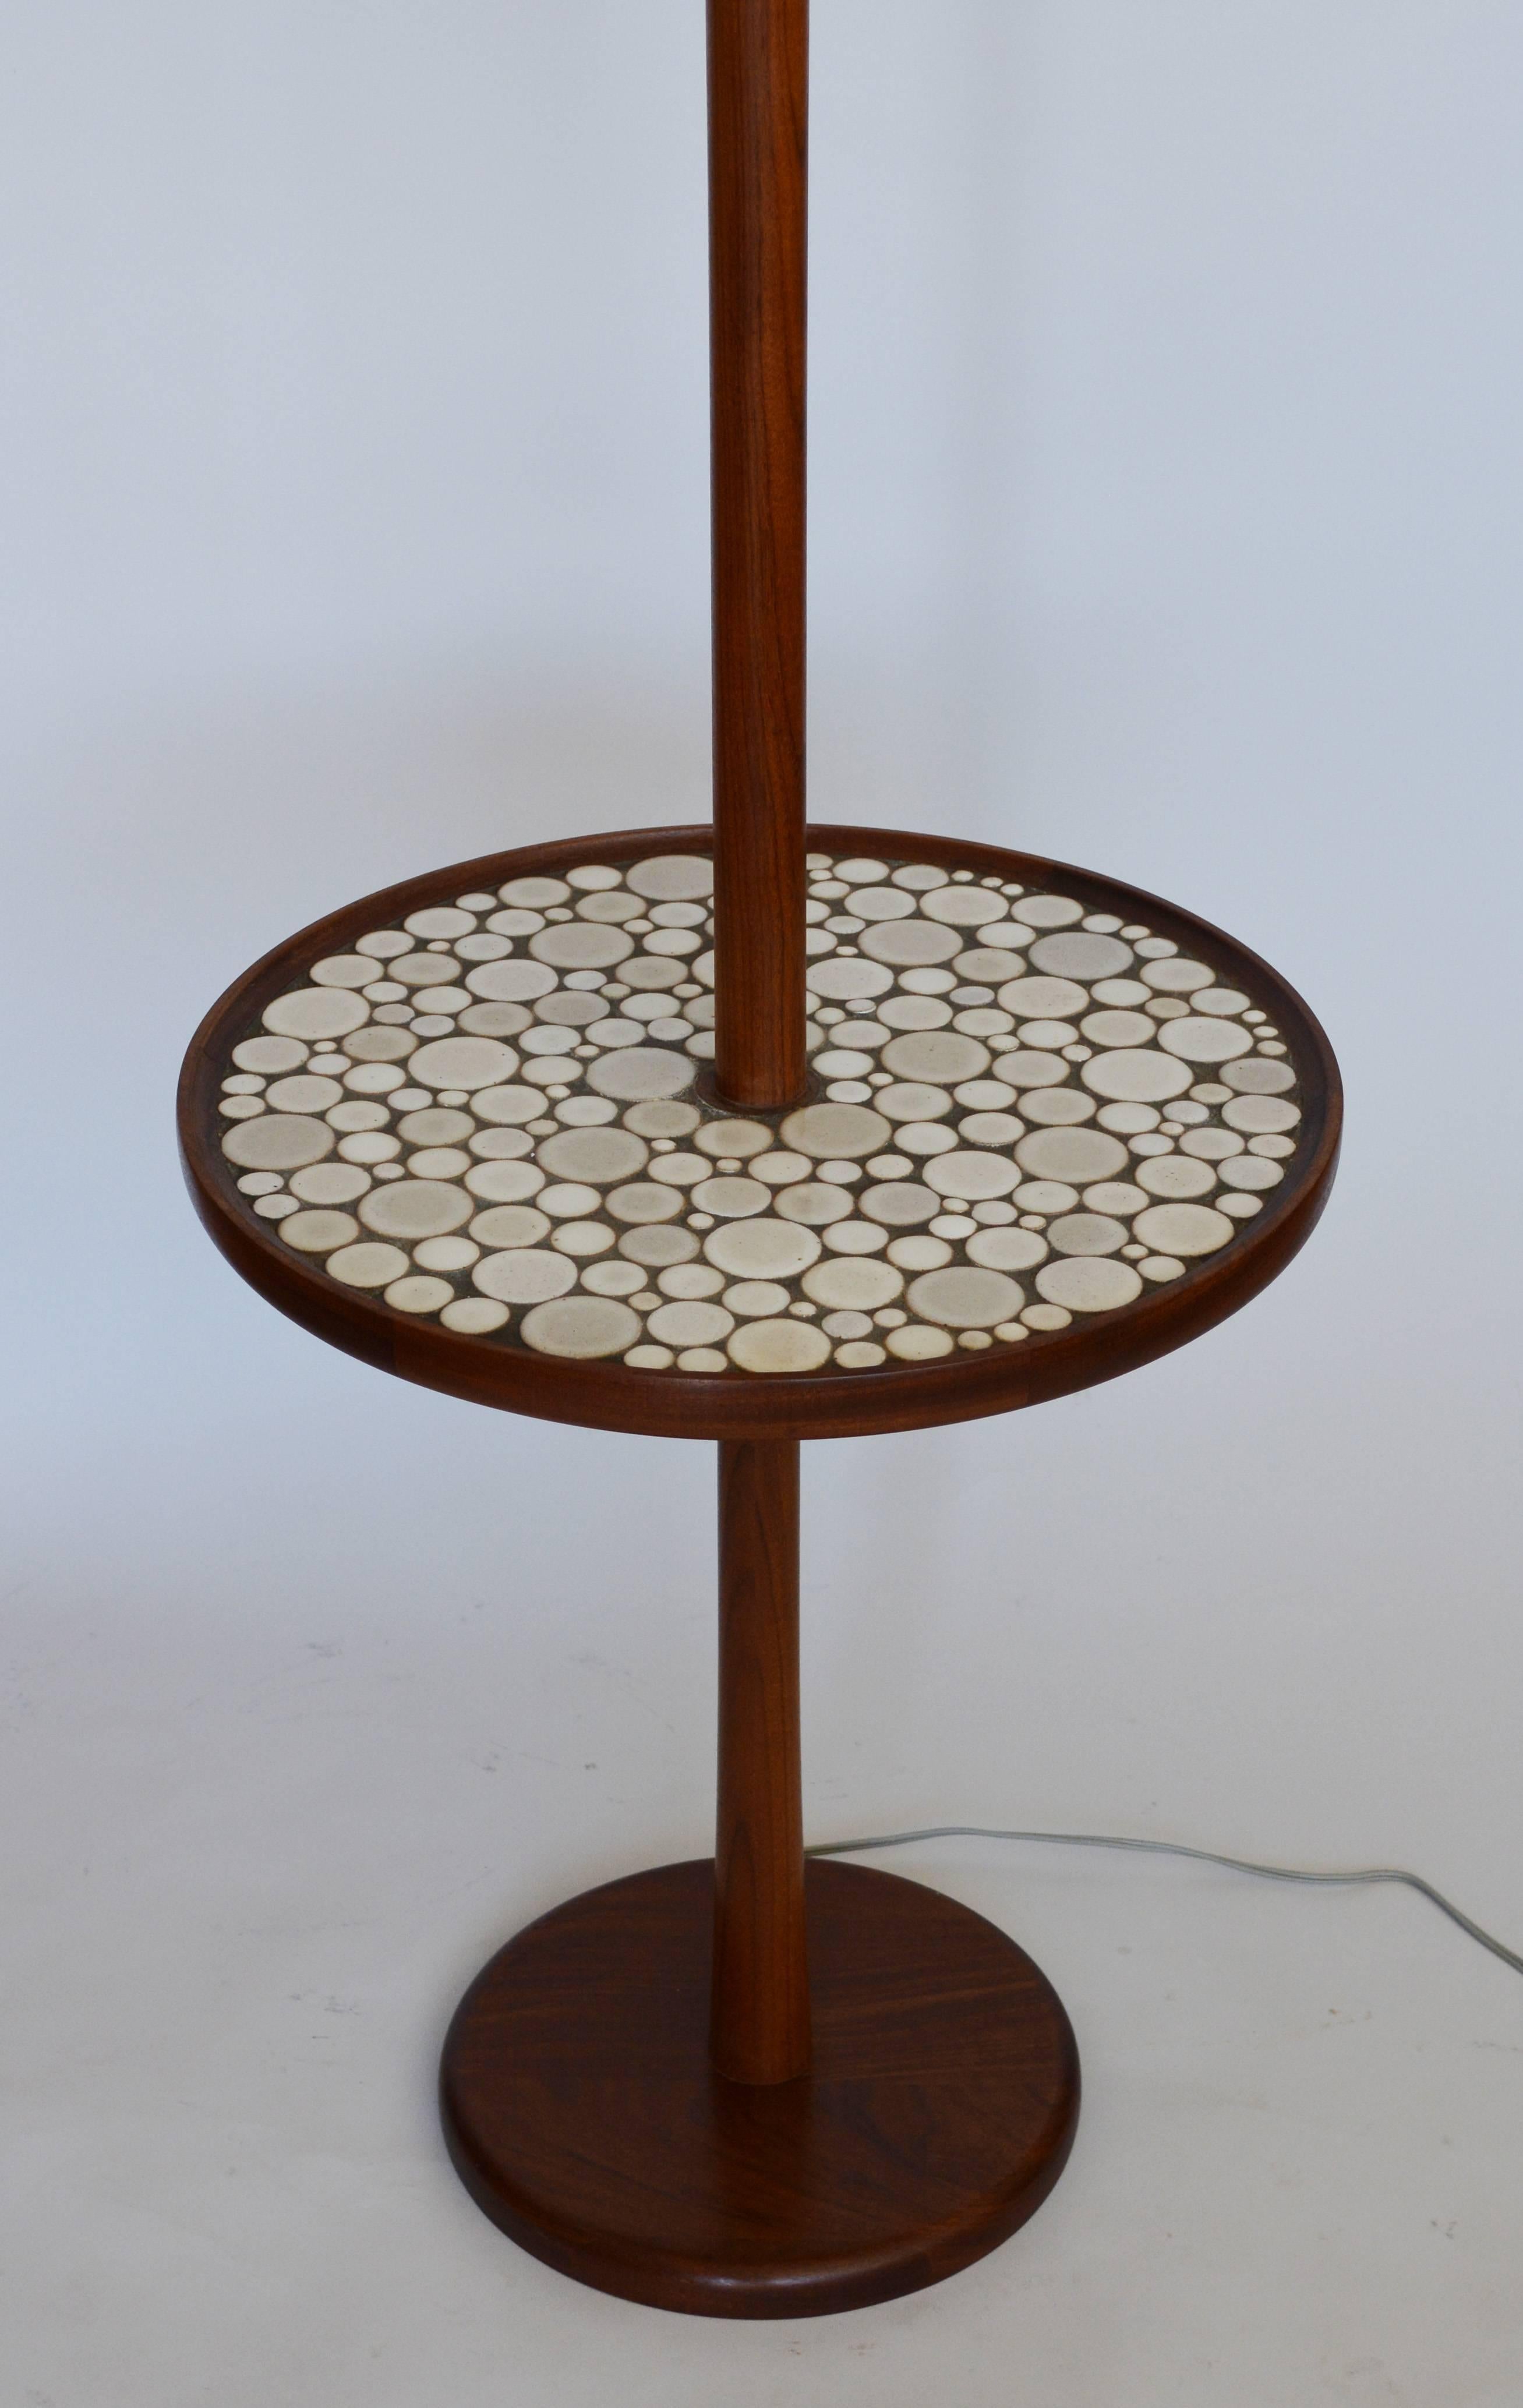 Walnut floor lamp with an integrated table by Gordon and Jane Martz. The tabletop features round off-white and light oyster tiles. The lamp has the original shade.